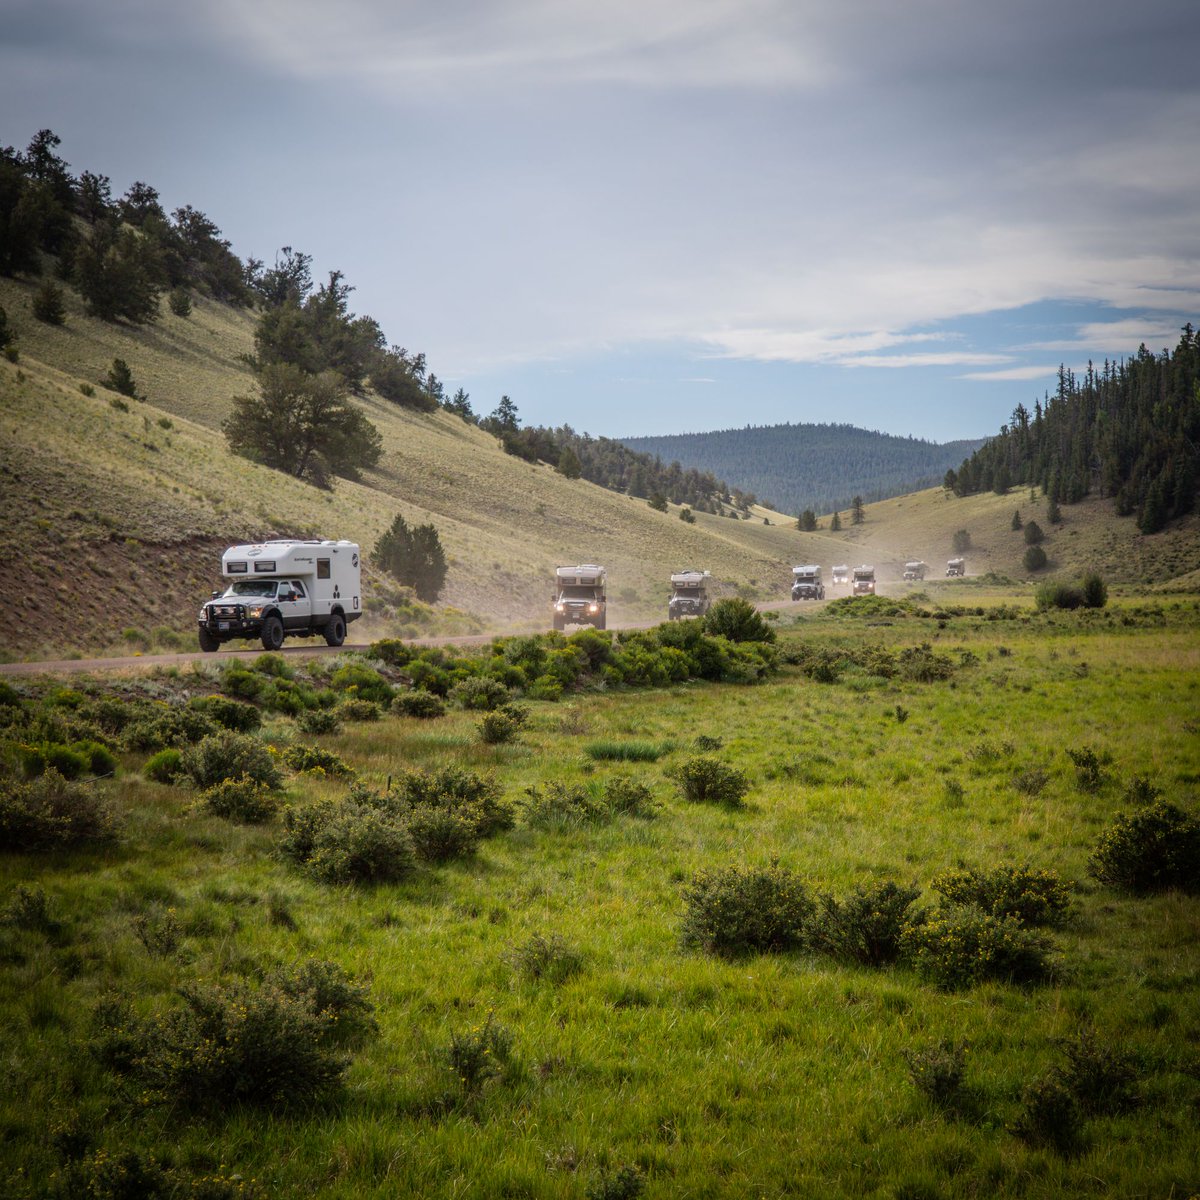 Leading the pack into the wild 🌲
·
·
·

#earthroamer  #offroad4x4 #expeditionvehicle #campinglife #overlanding #4x4life #4x4trucks #vanlife #vanlifeadventures